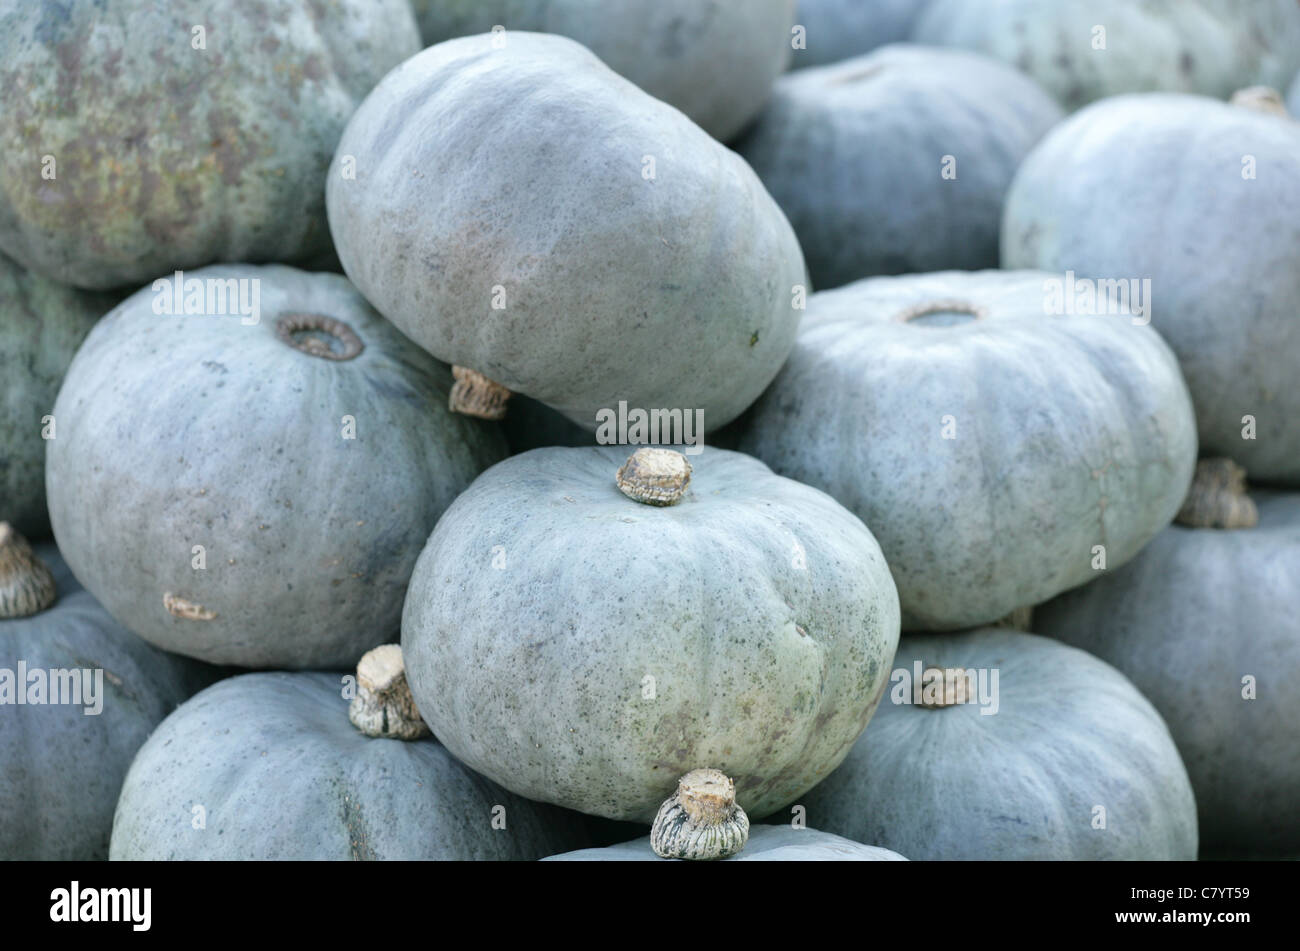 crown prince squash in a pile Stock Photo